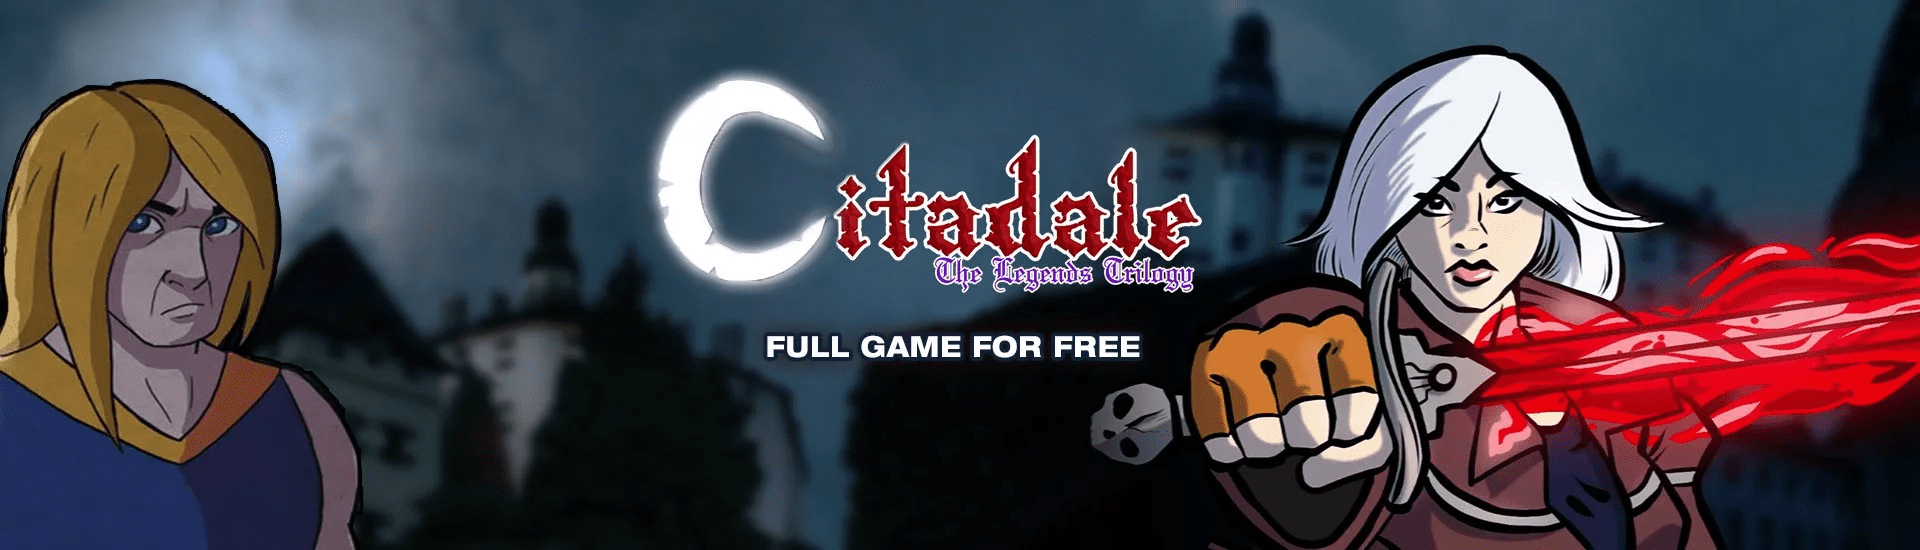 Citadale: The Legends Trilogy Is Free On IndieGala